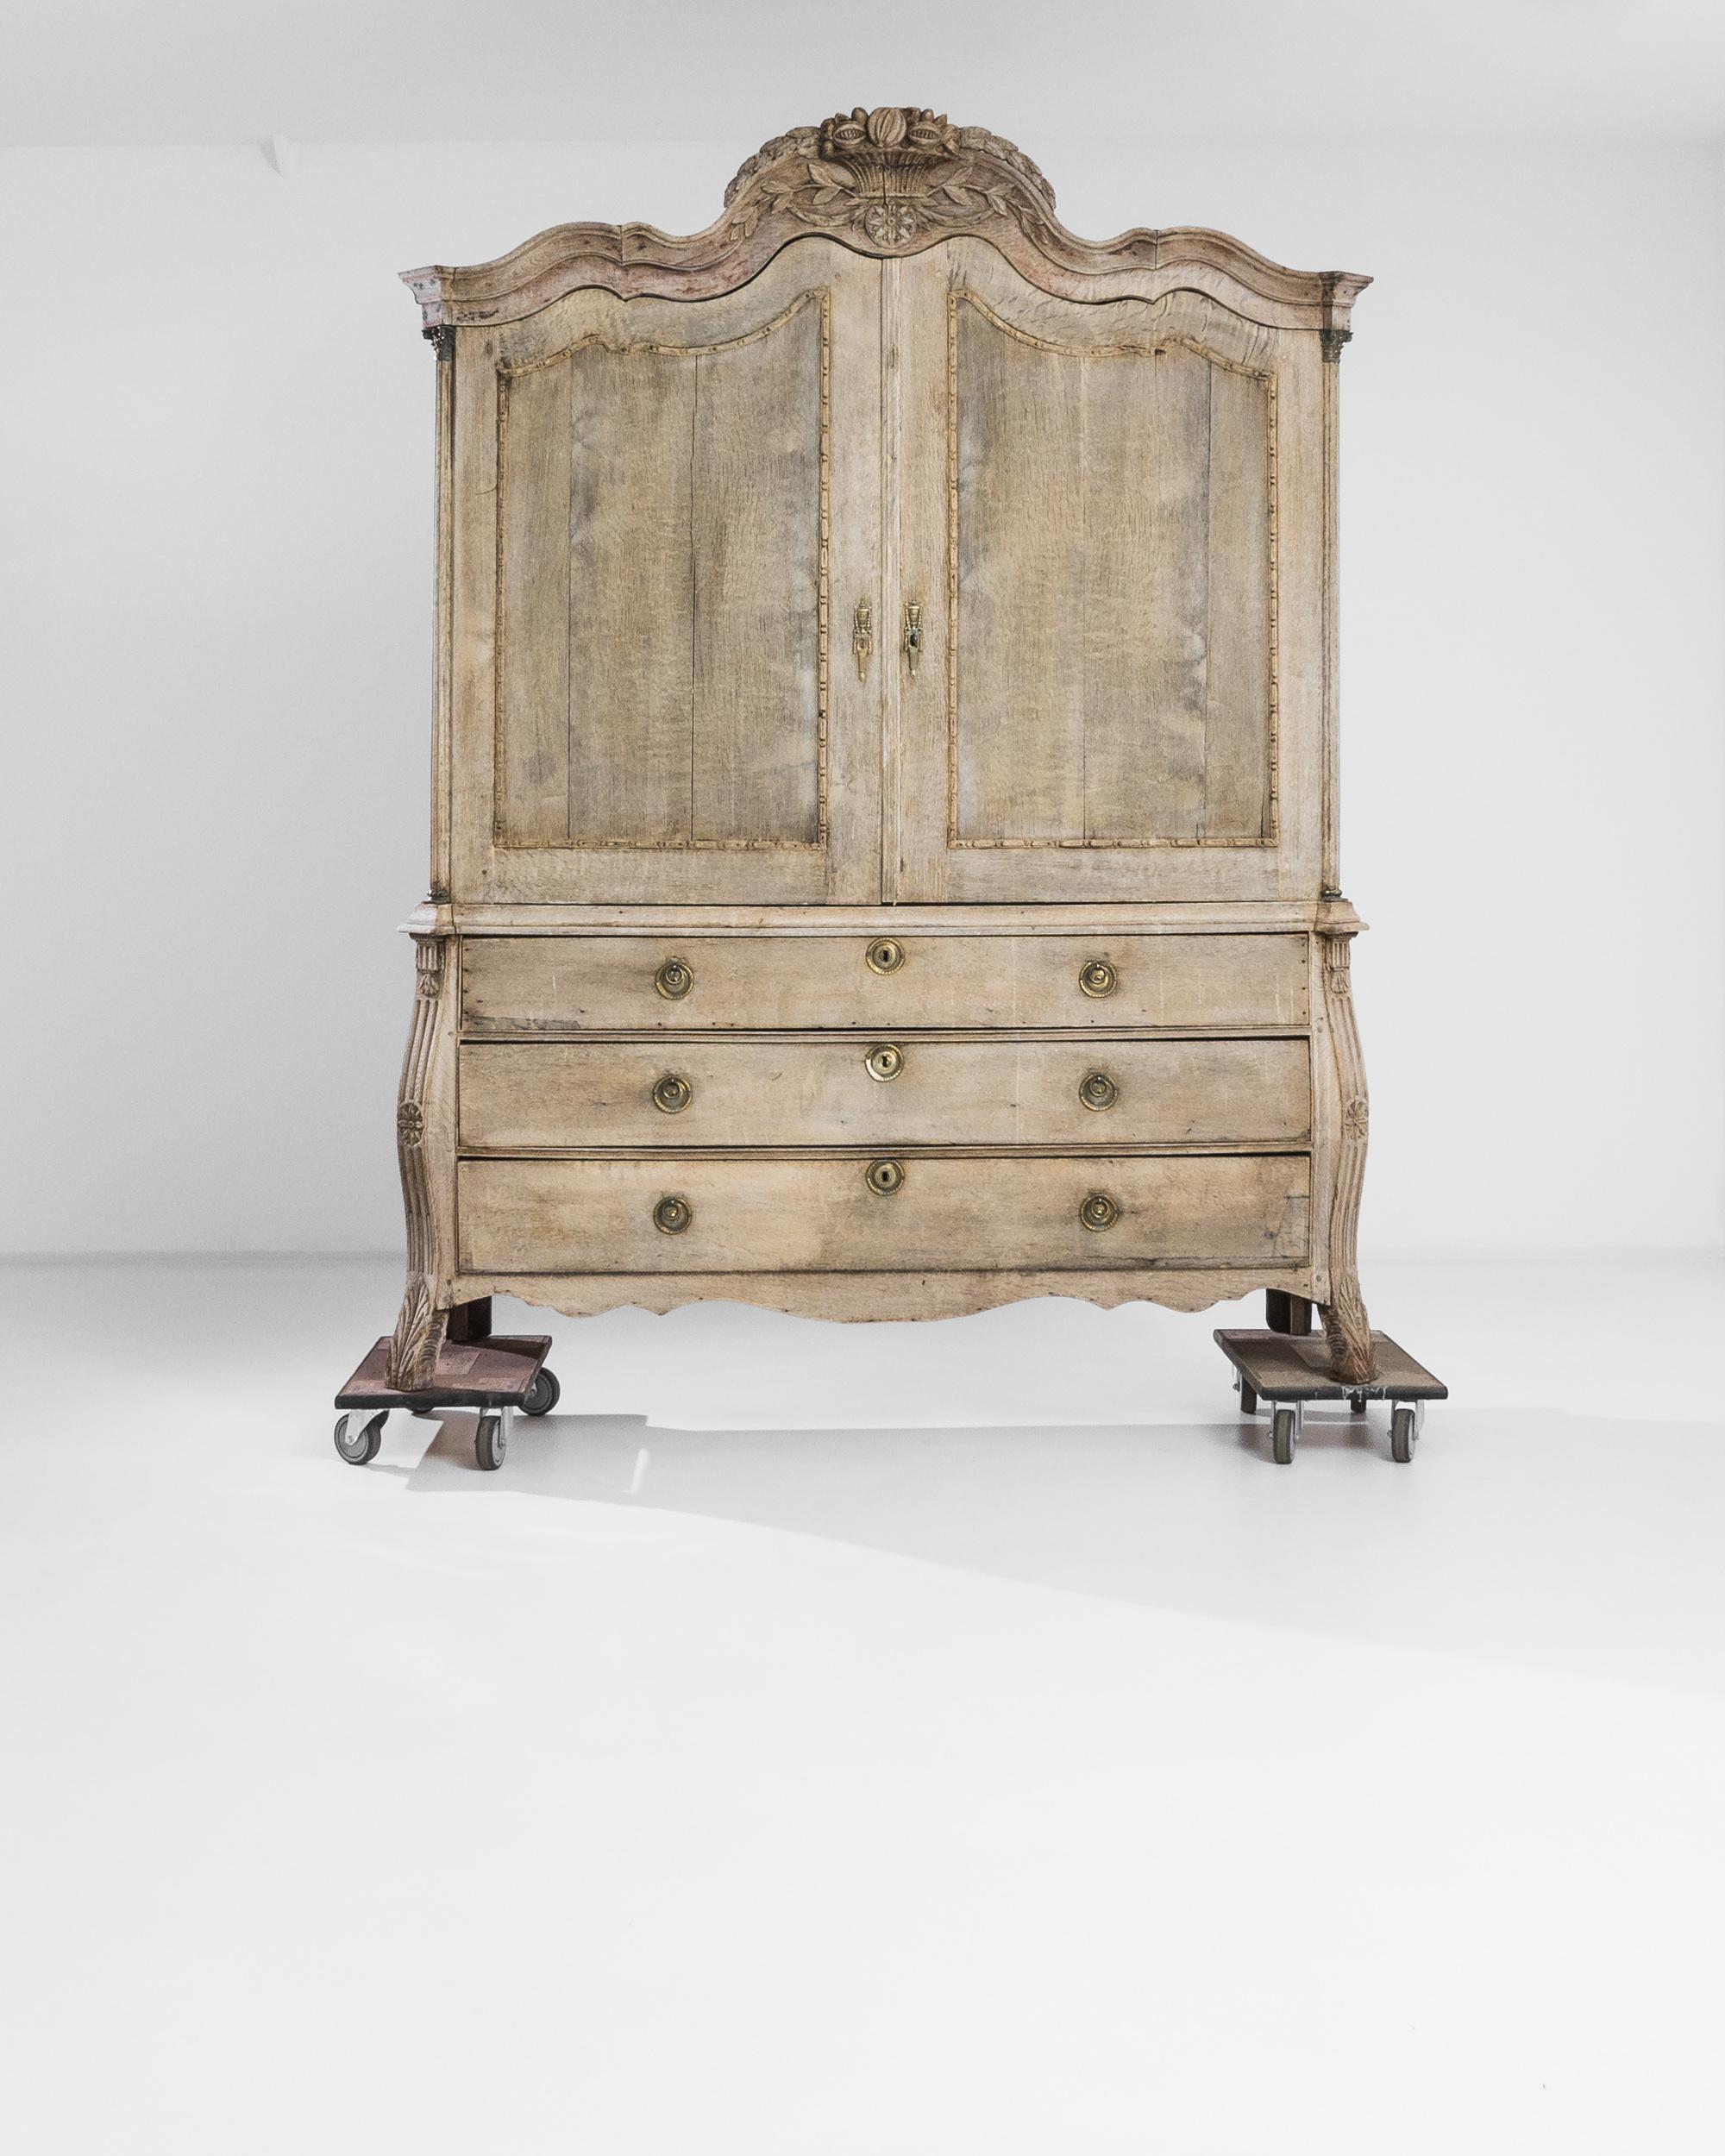 An antique oak cabinet with a beautiful Silhouette. Made in the Netherlands in the 1780s, the scalloped cornice lends the case a sinuous shape; a carved cornucopia of fruit, nuts and flowers, wreathed with laurel leaves, provides a crowning detail.